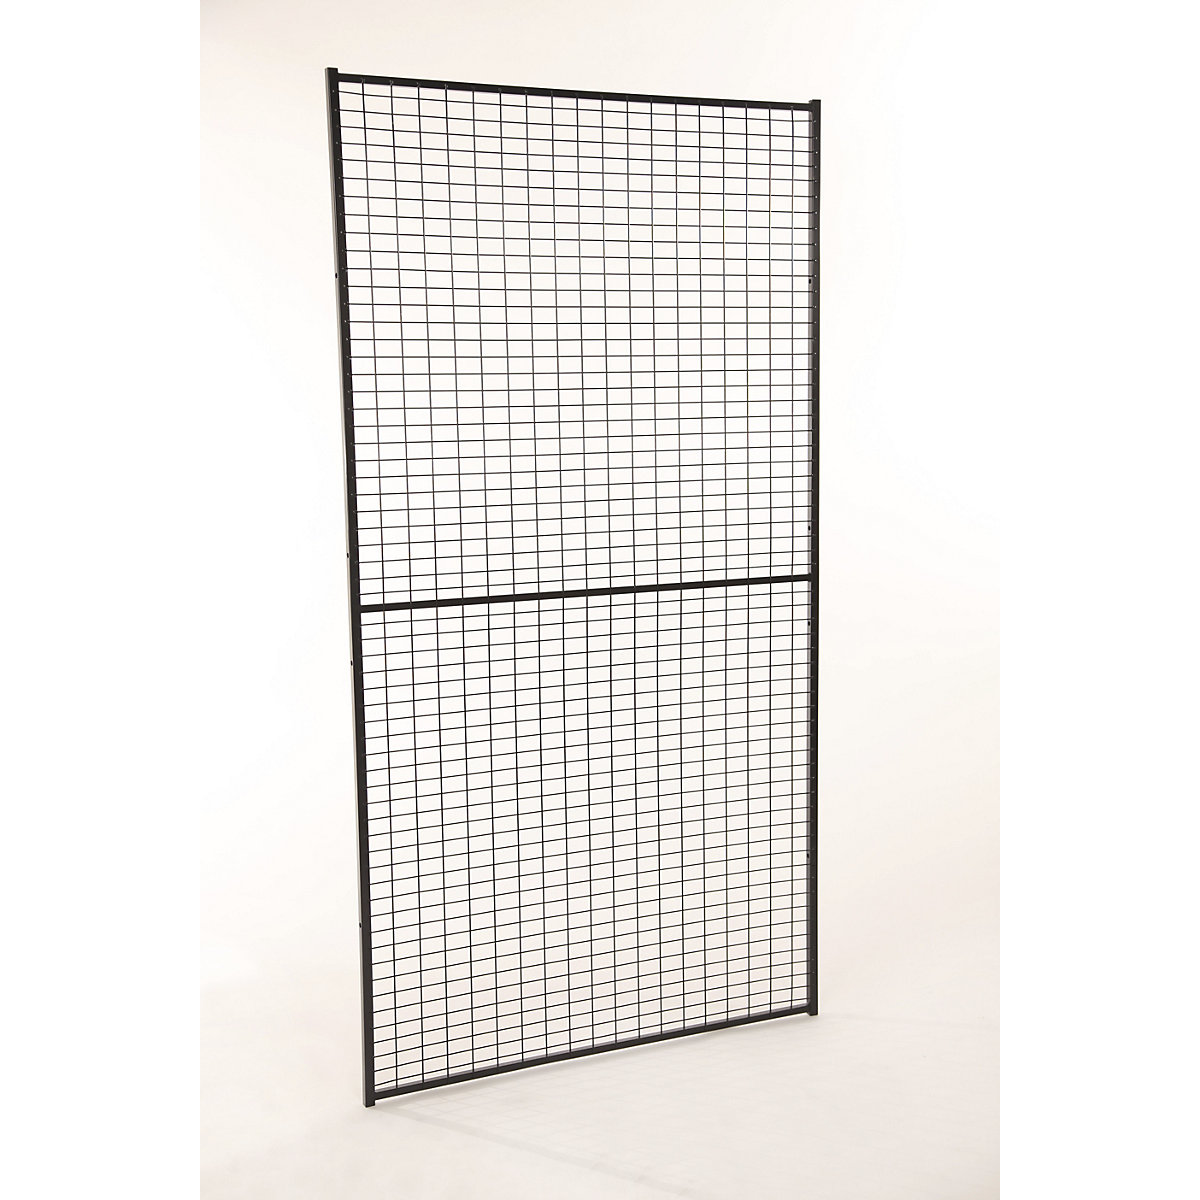 X-GUARD LITE machine protective fencing, wall section – Axelent, height 2200 mm, width 500 mm-10